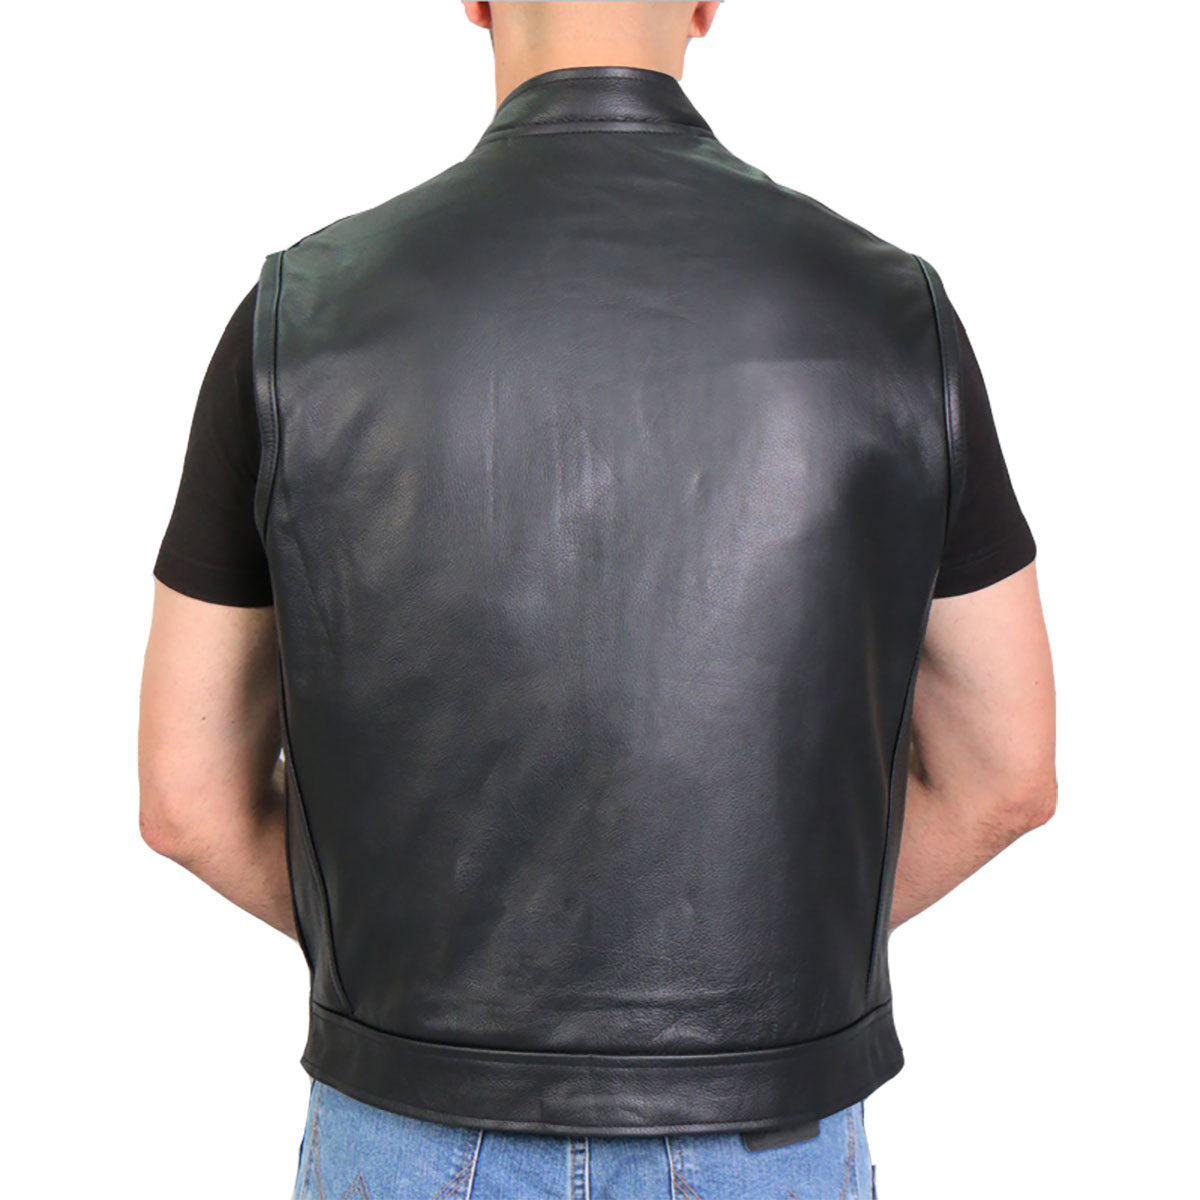 Hot Leathers VSM1057 Men’s Black 'Mexican Blanket' Conceal and Carry Leather Vest